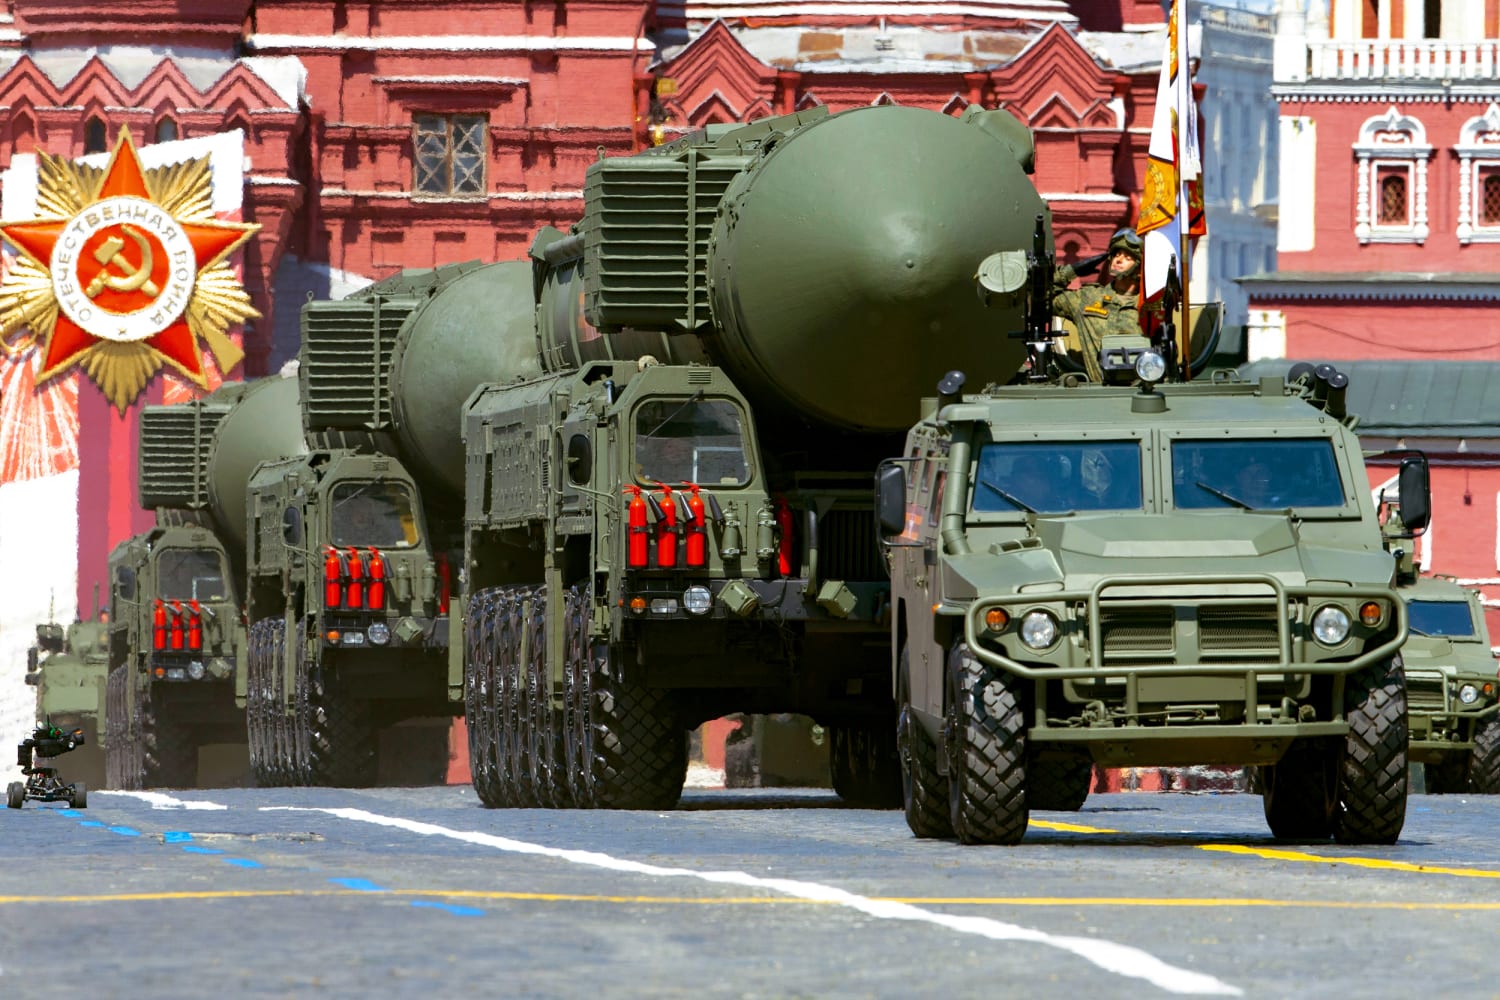 Russia stops sharing information on nuclear forces with the U.S.